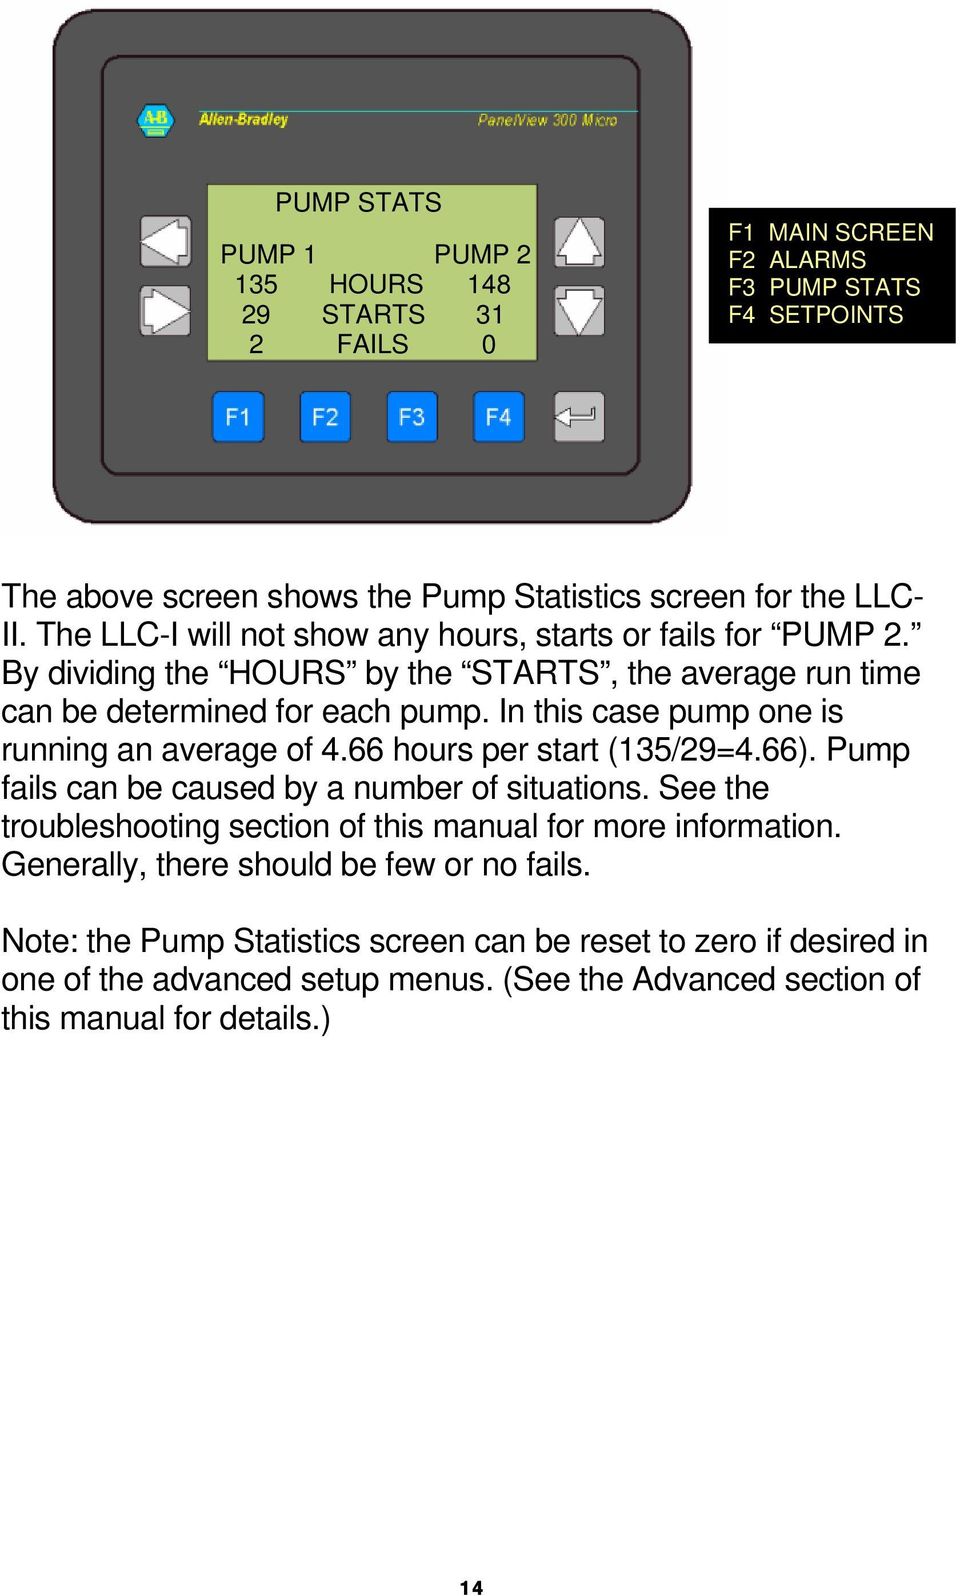 In this case pump one is running an average of 4.66 hours per start (135/29=4.66). Pump fails can be caused by a number of situations.